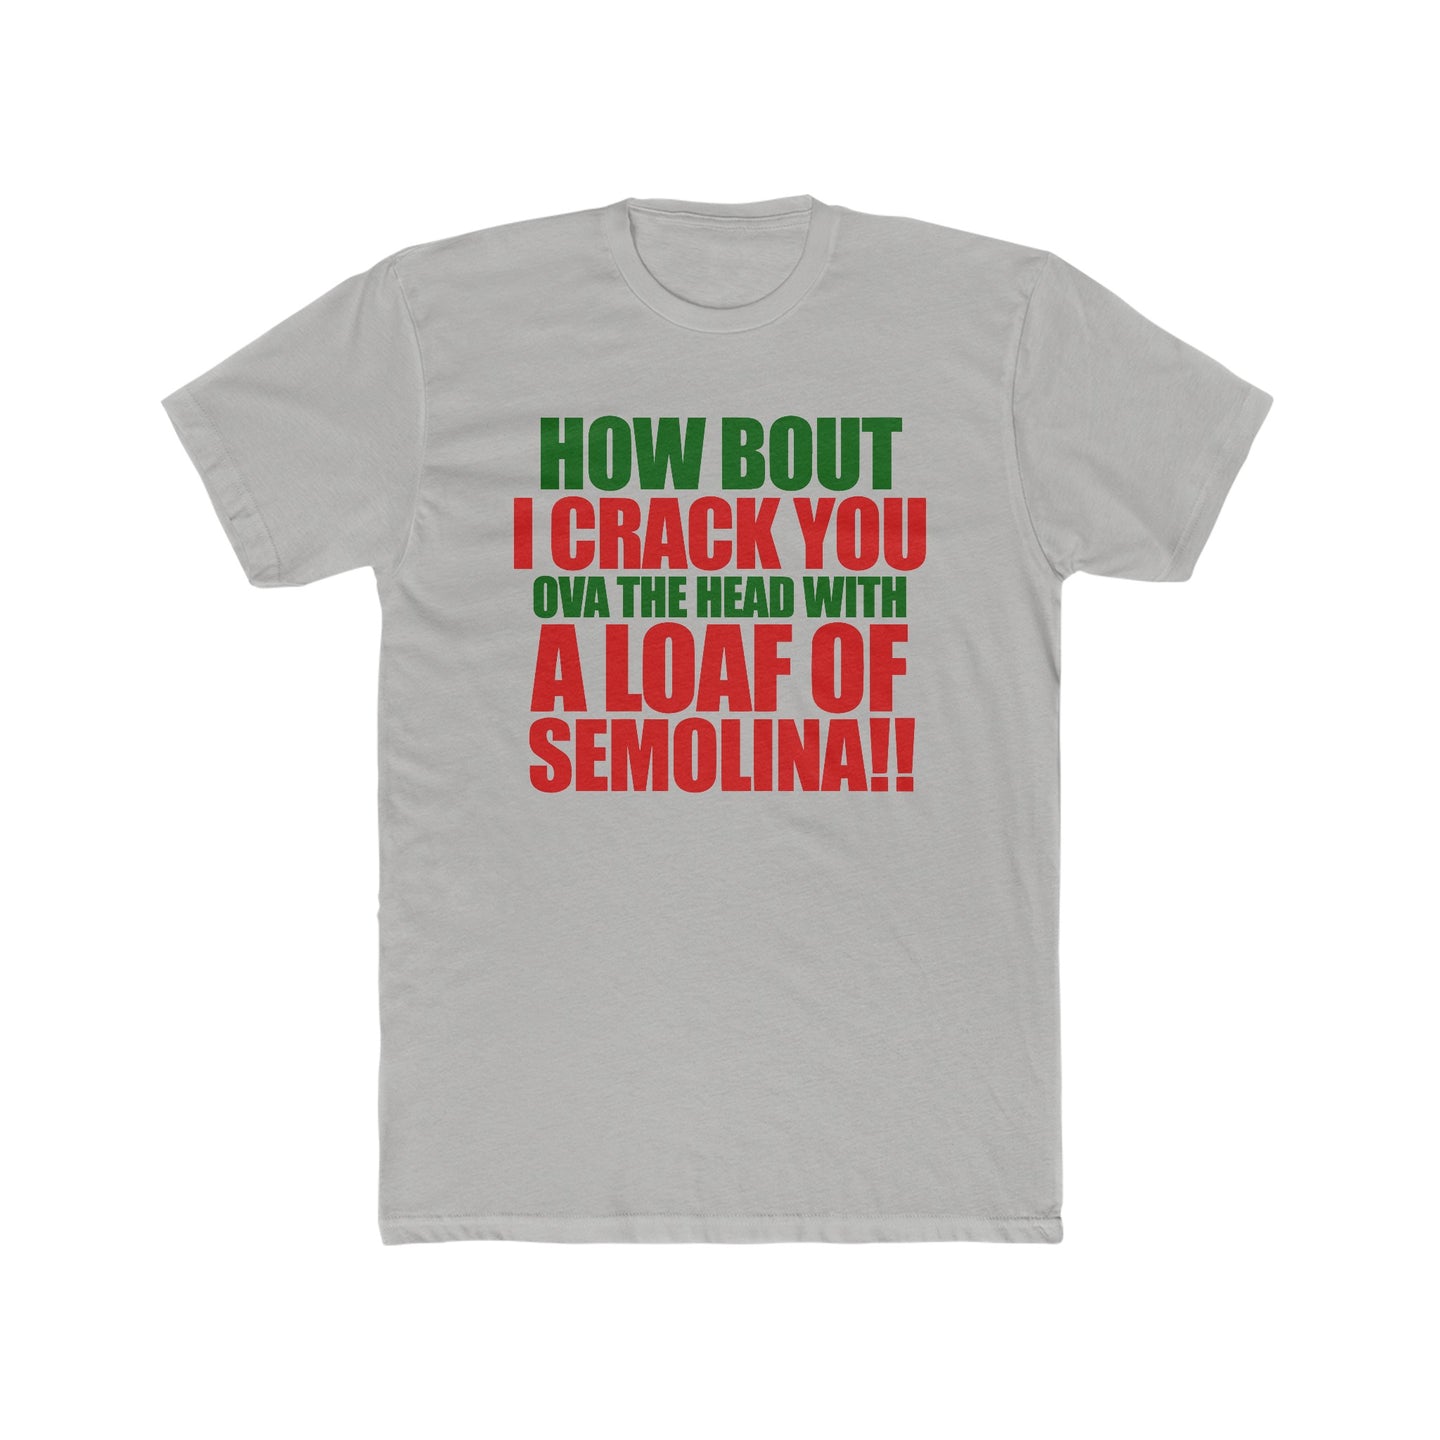 How Bout I Crack You Ova the Head! Green & Red Text Cotton Crew Tee